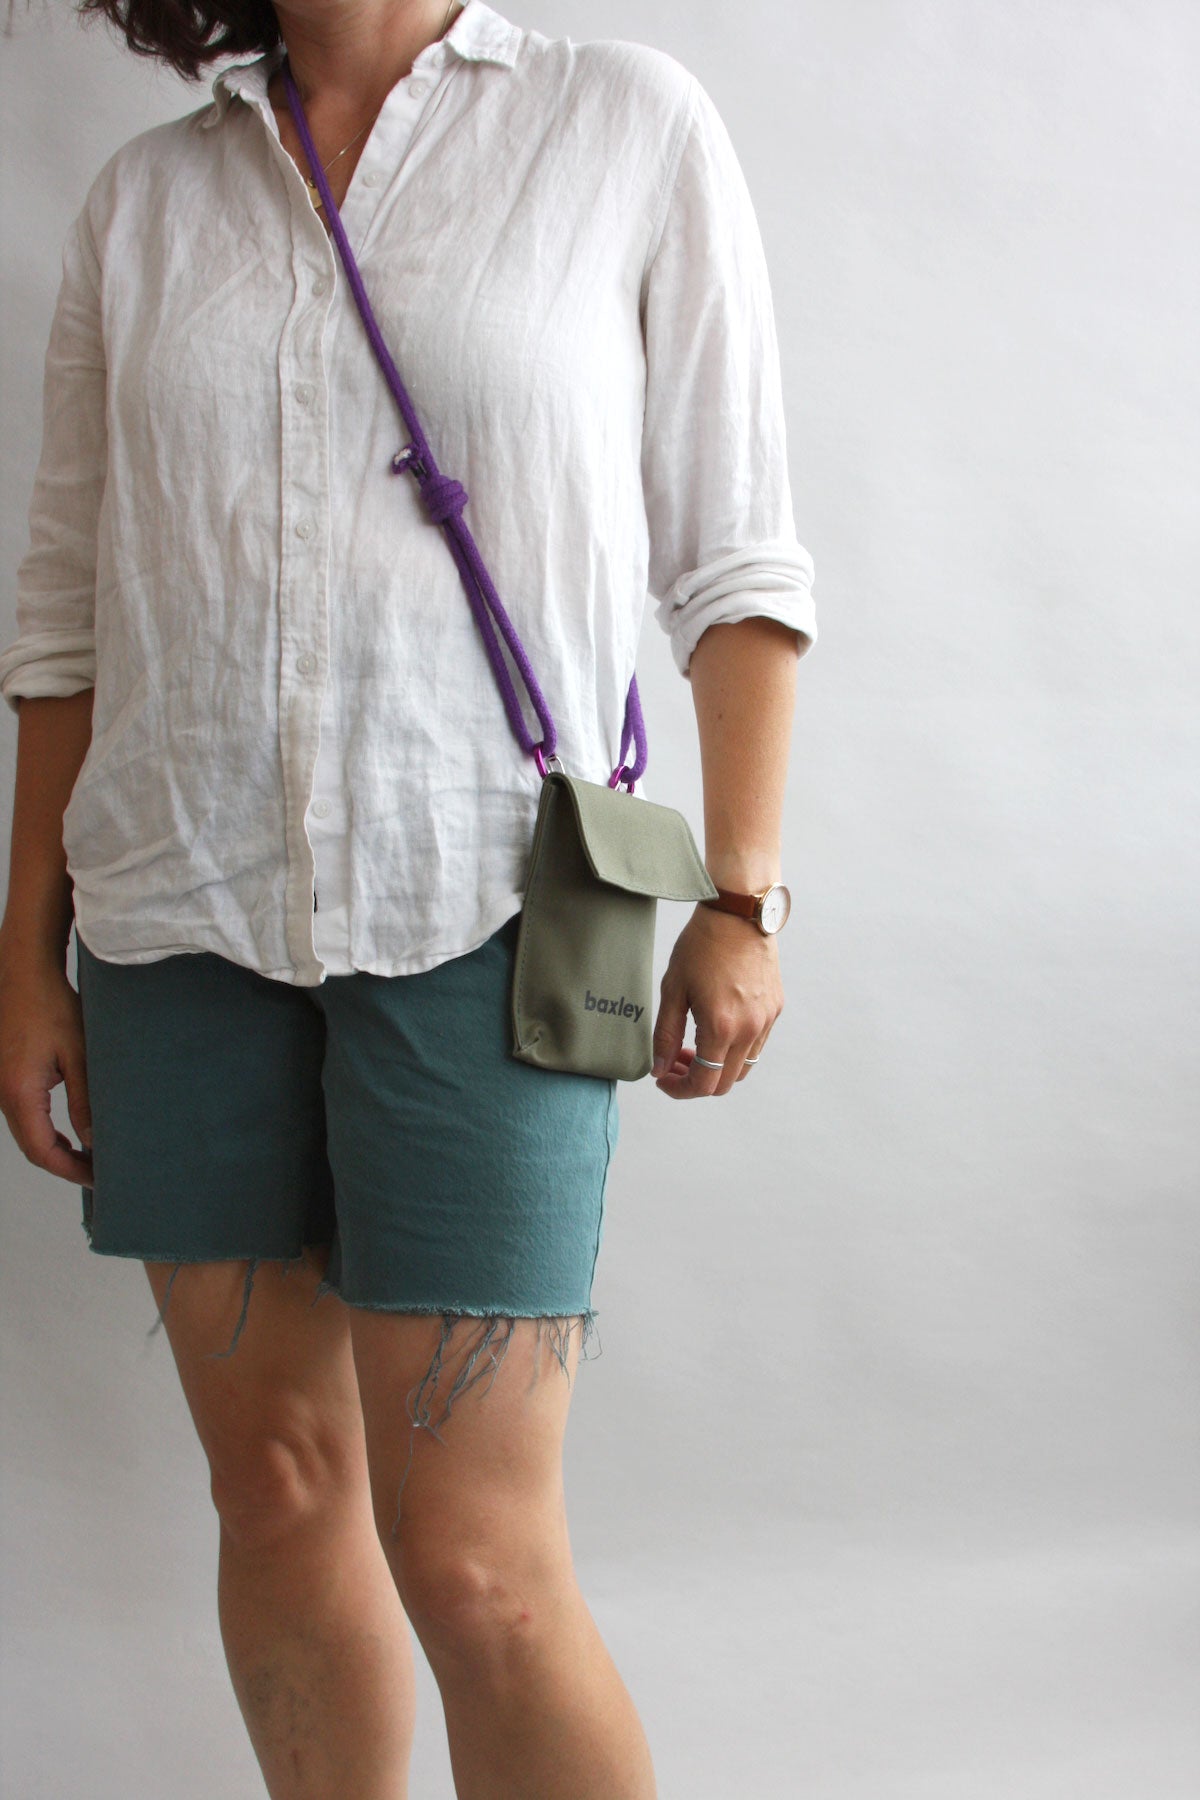 Pip the pocket worn cross-body on a model. The bag is sage green, has a screen-printed logo, and a purple rope strap. The model is in a studio setting, wearing informal clothing.